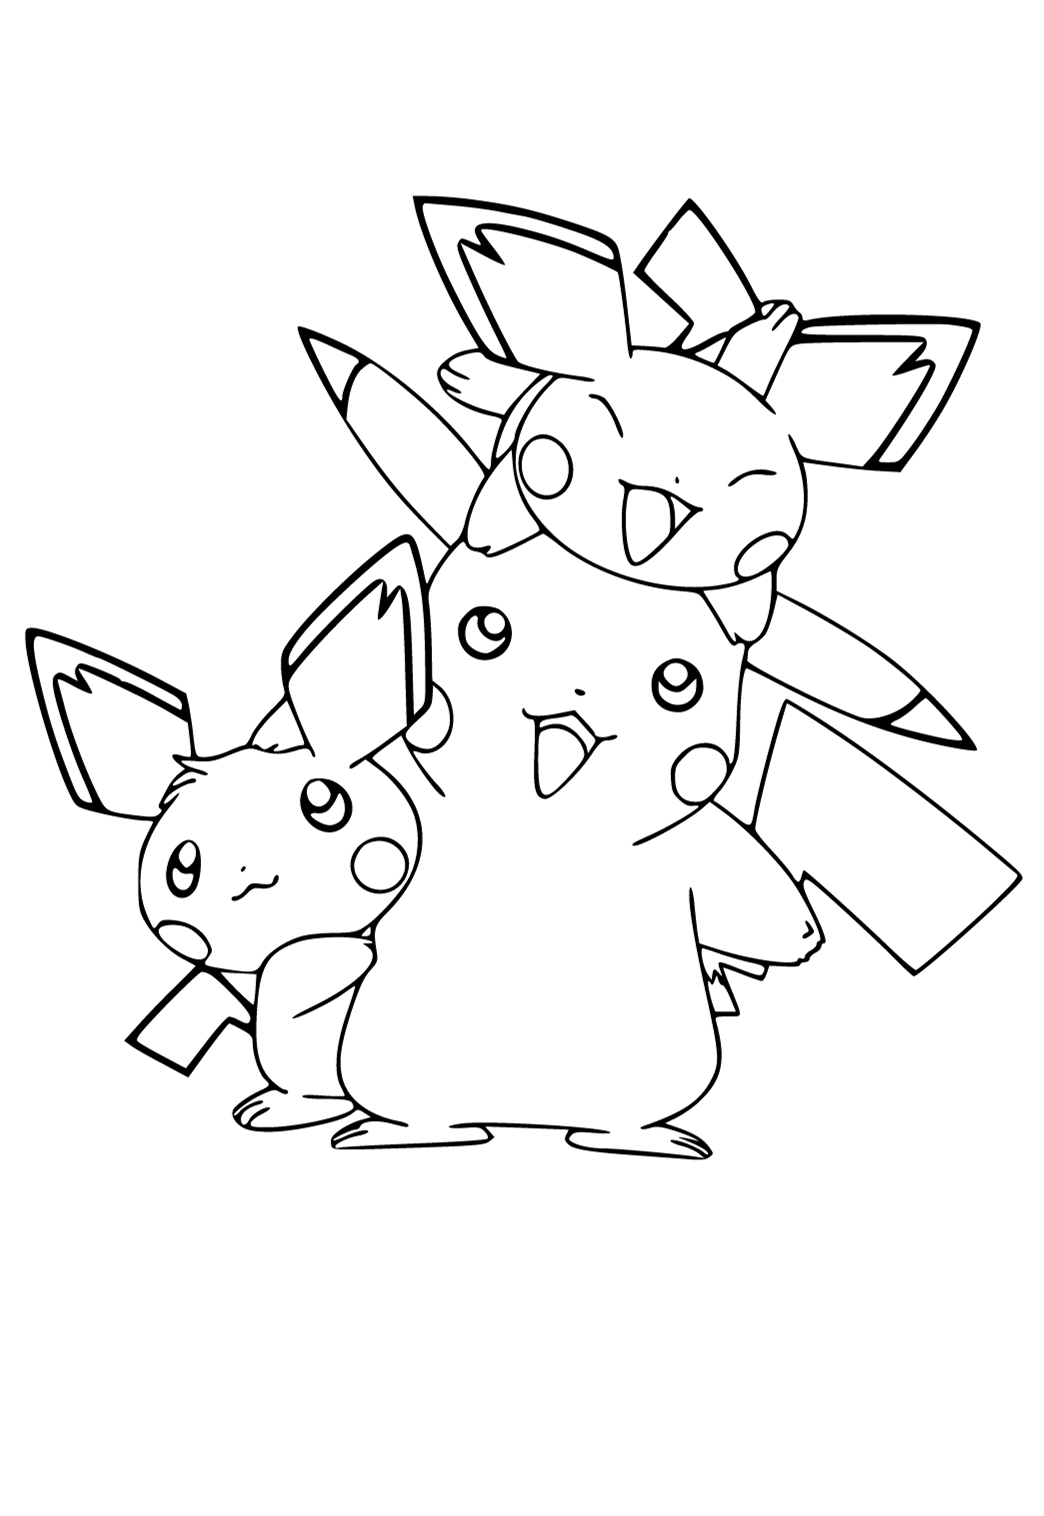 Free printable pichu characters coloring page for adults and kids